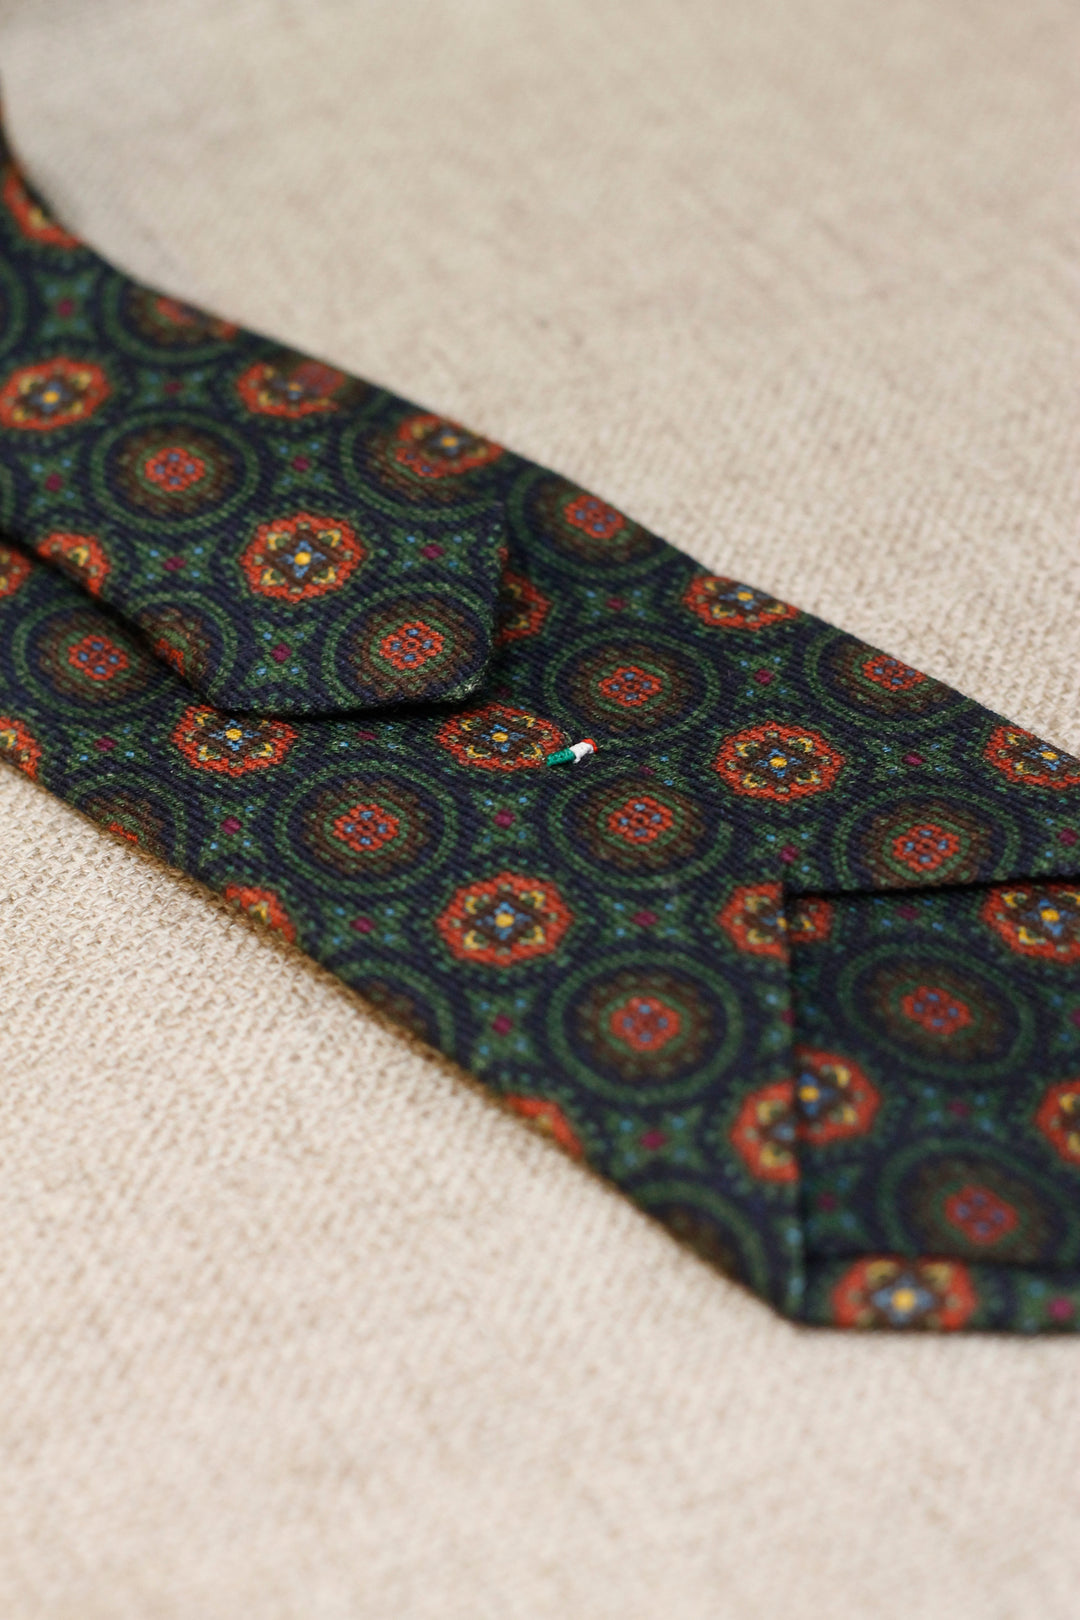 Napoli WOOL Tie Green Bottle Medallions XL Burgundy Yellow and Navy